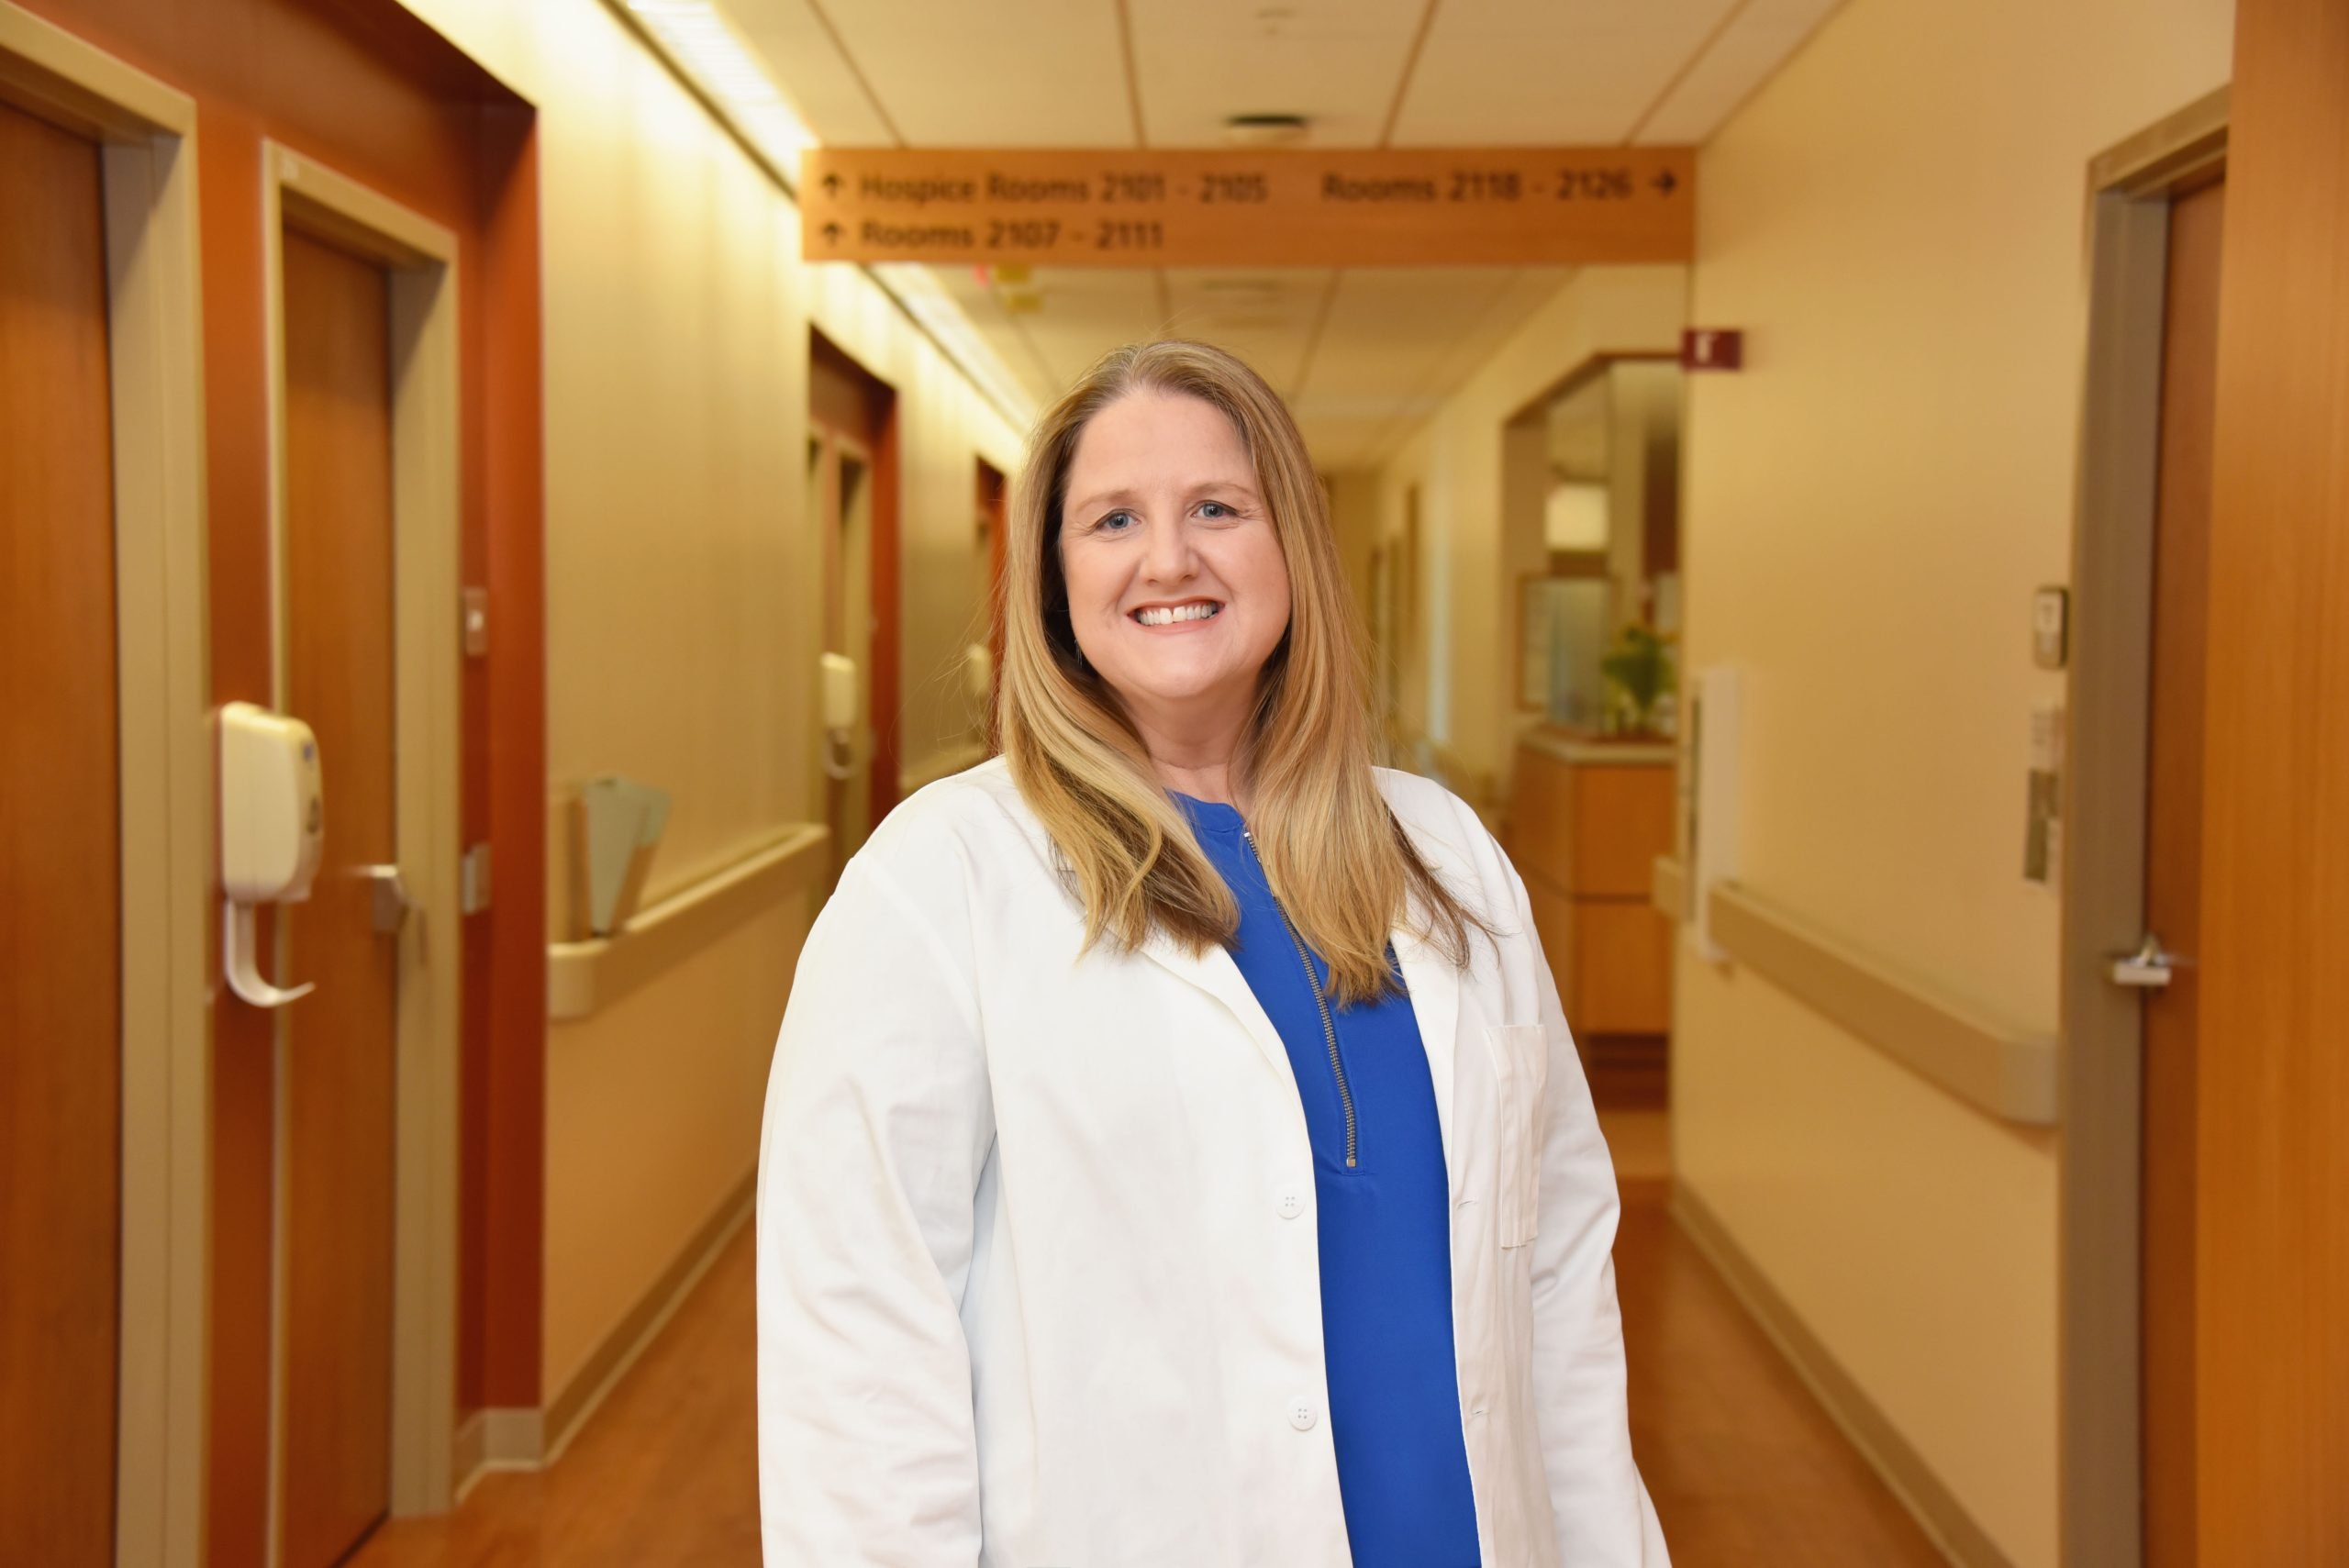 Jessica Lainhart, Family Nurse Practitioner, smiles warmly in her lab coat, excited to see new patients at ACRMC Family Medicine in Georgetown.